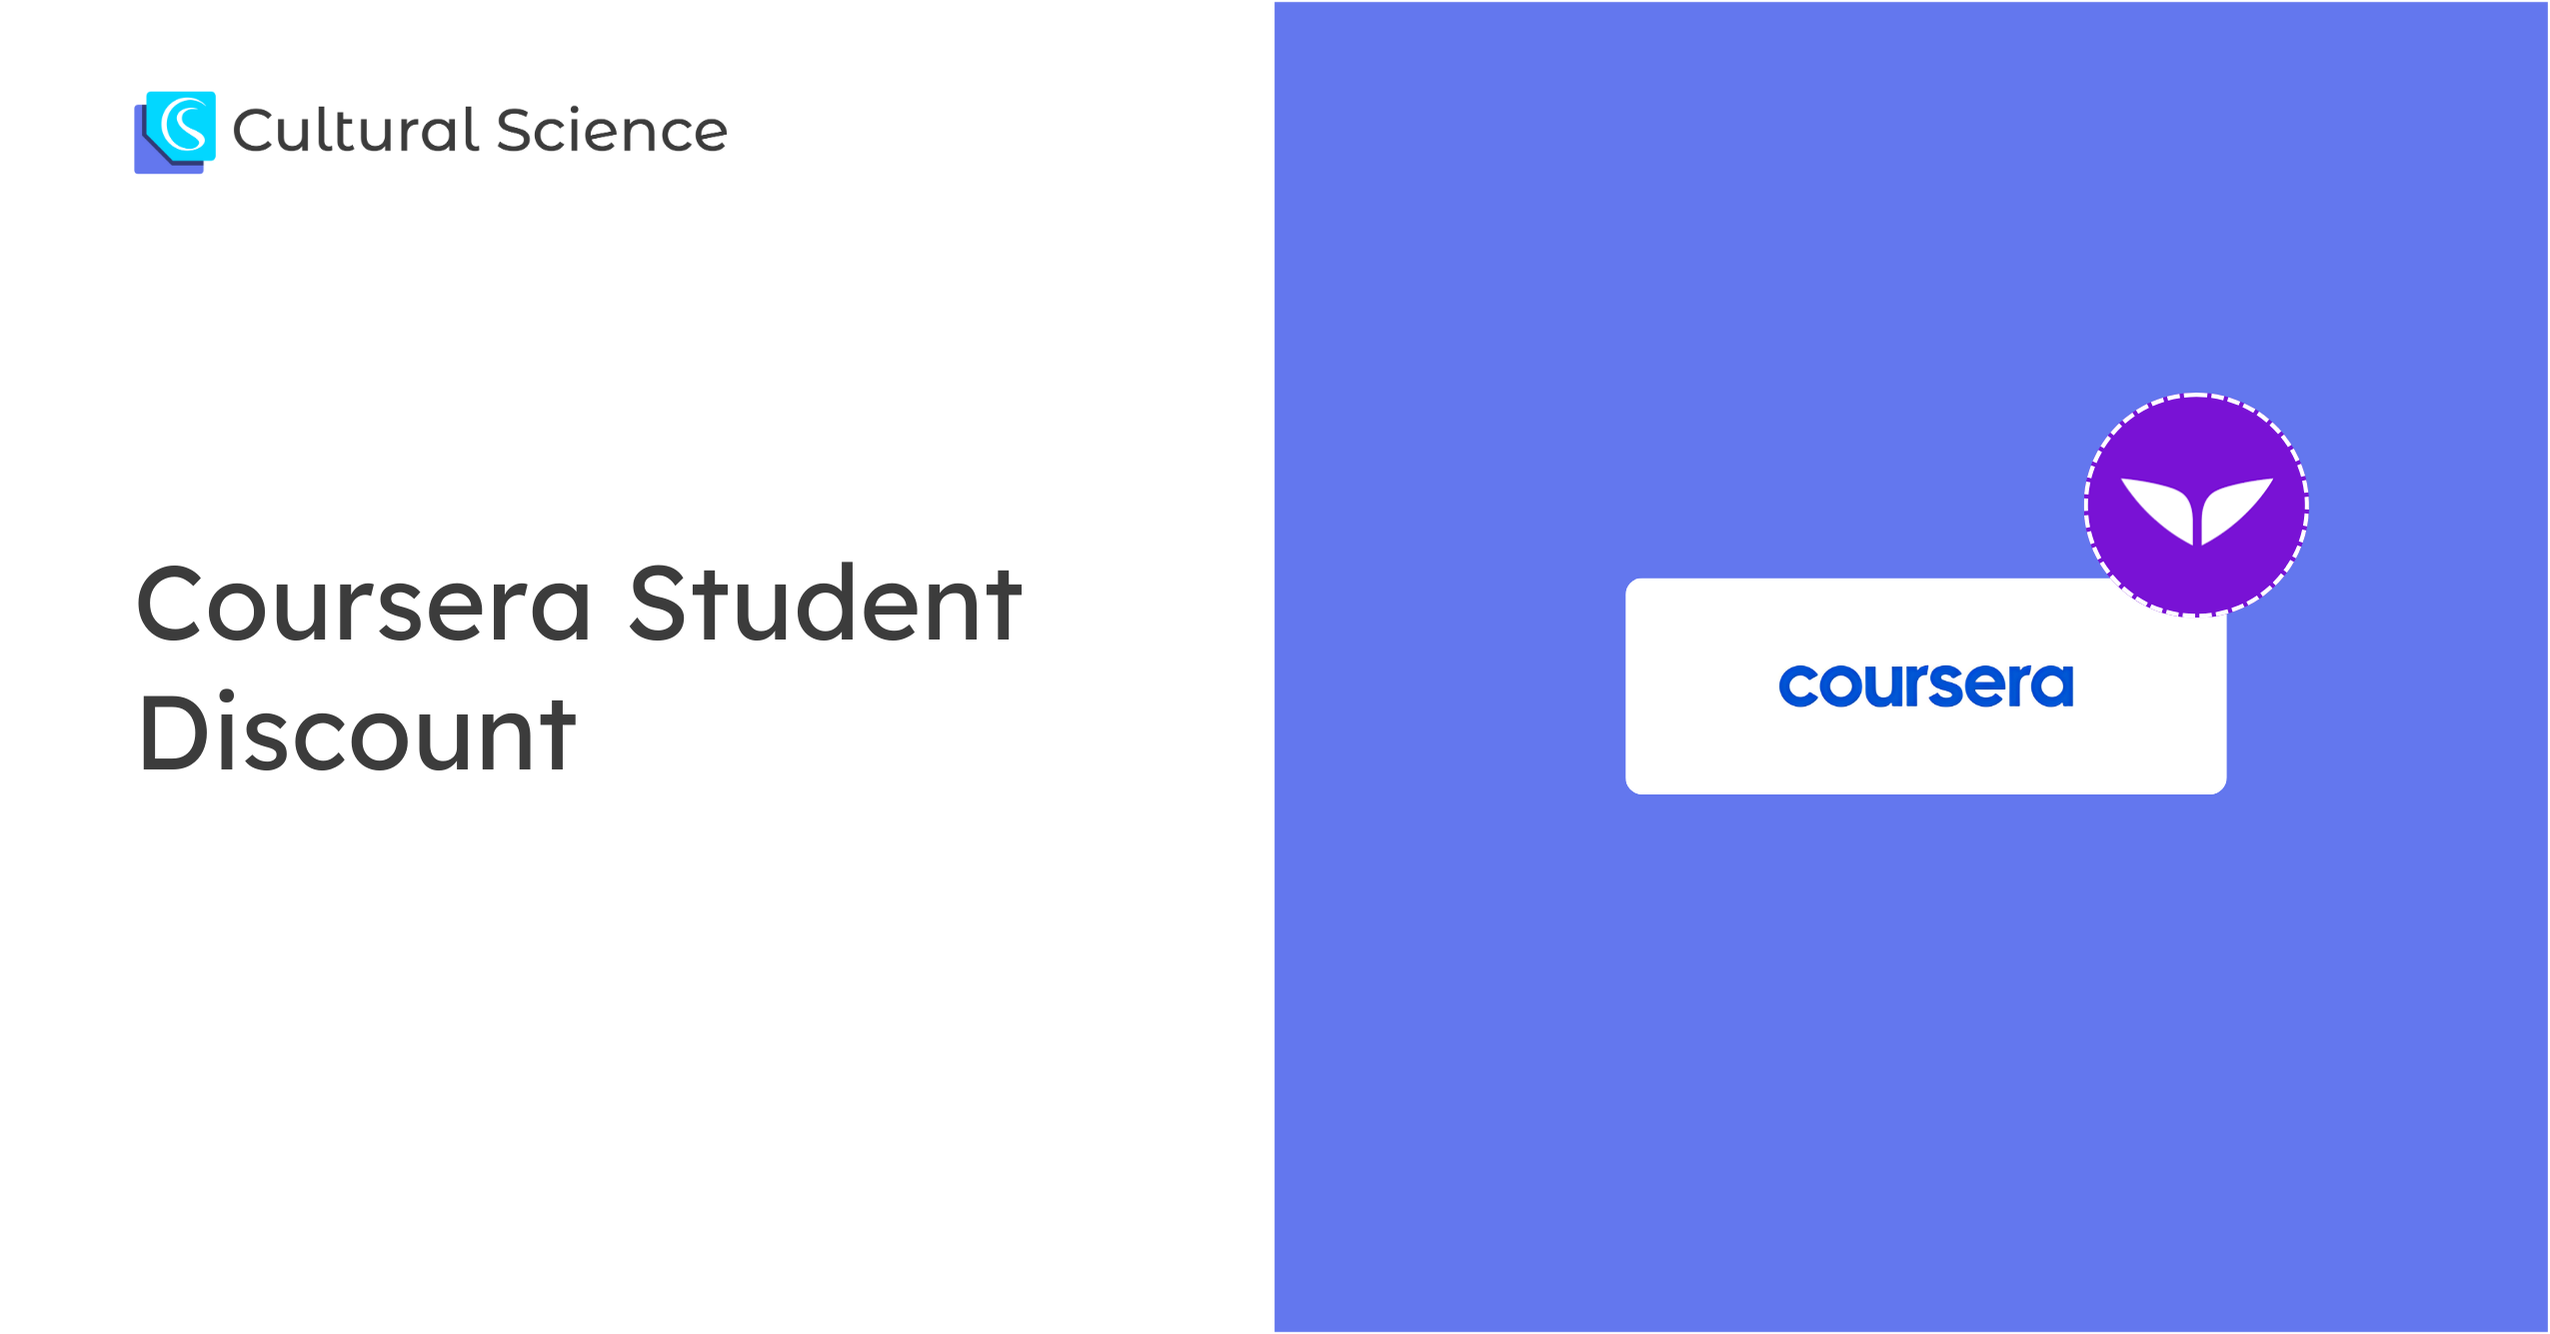 Coursera Student Discount